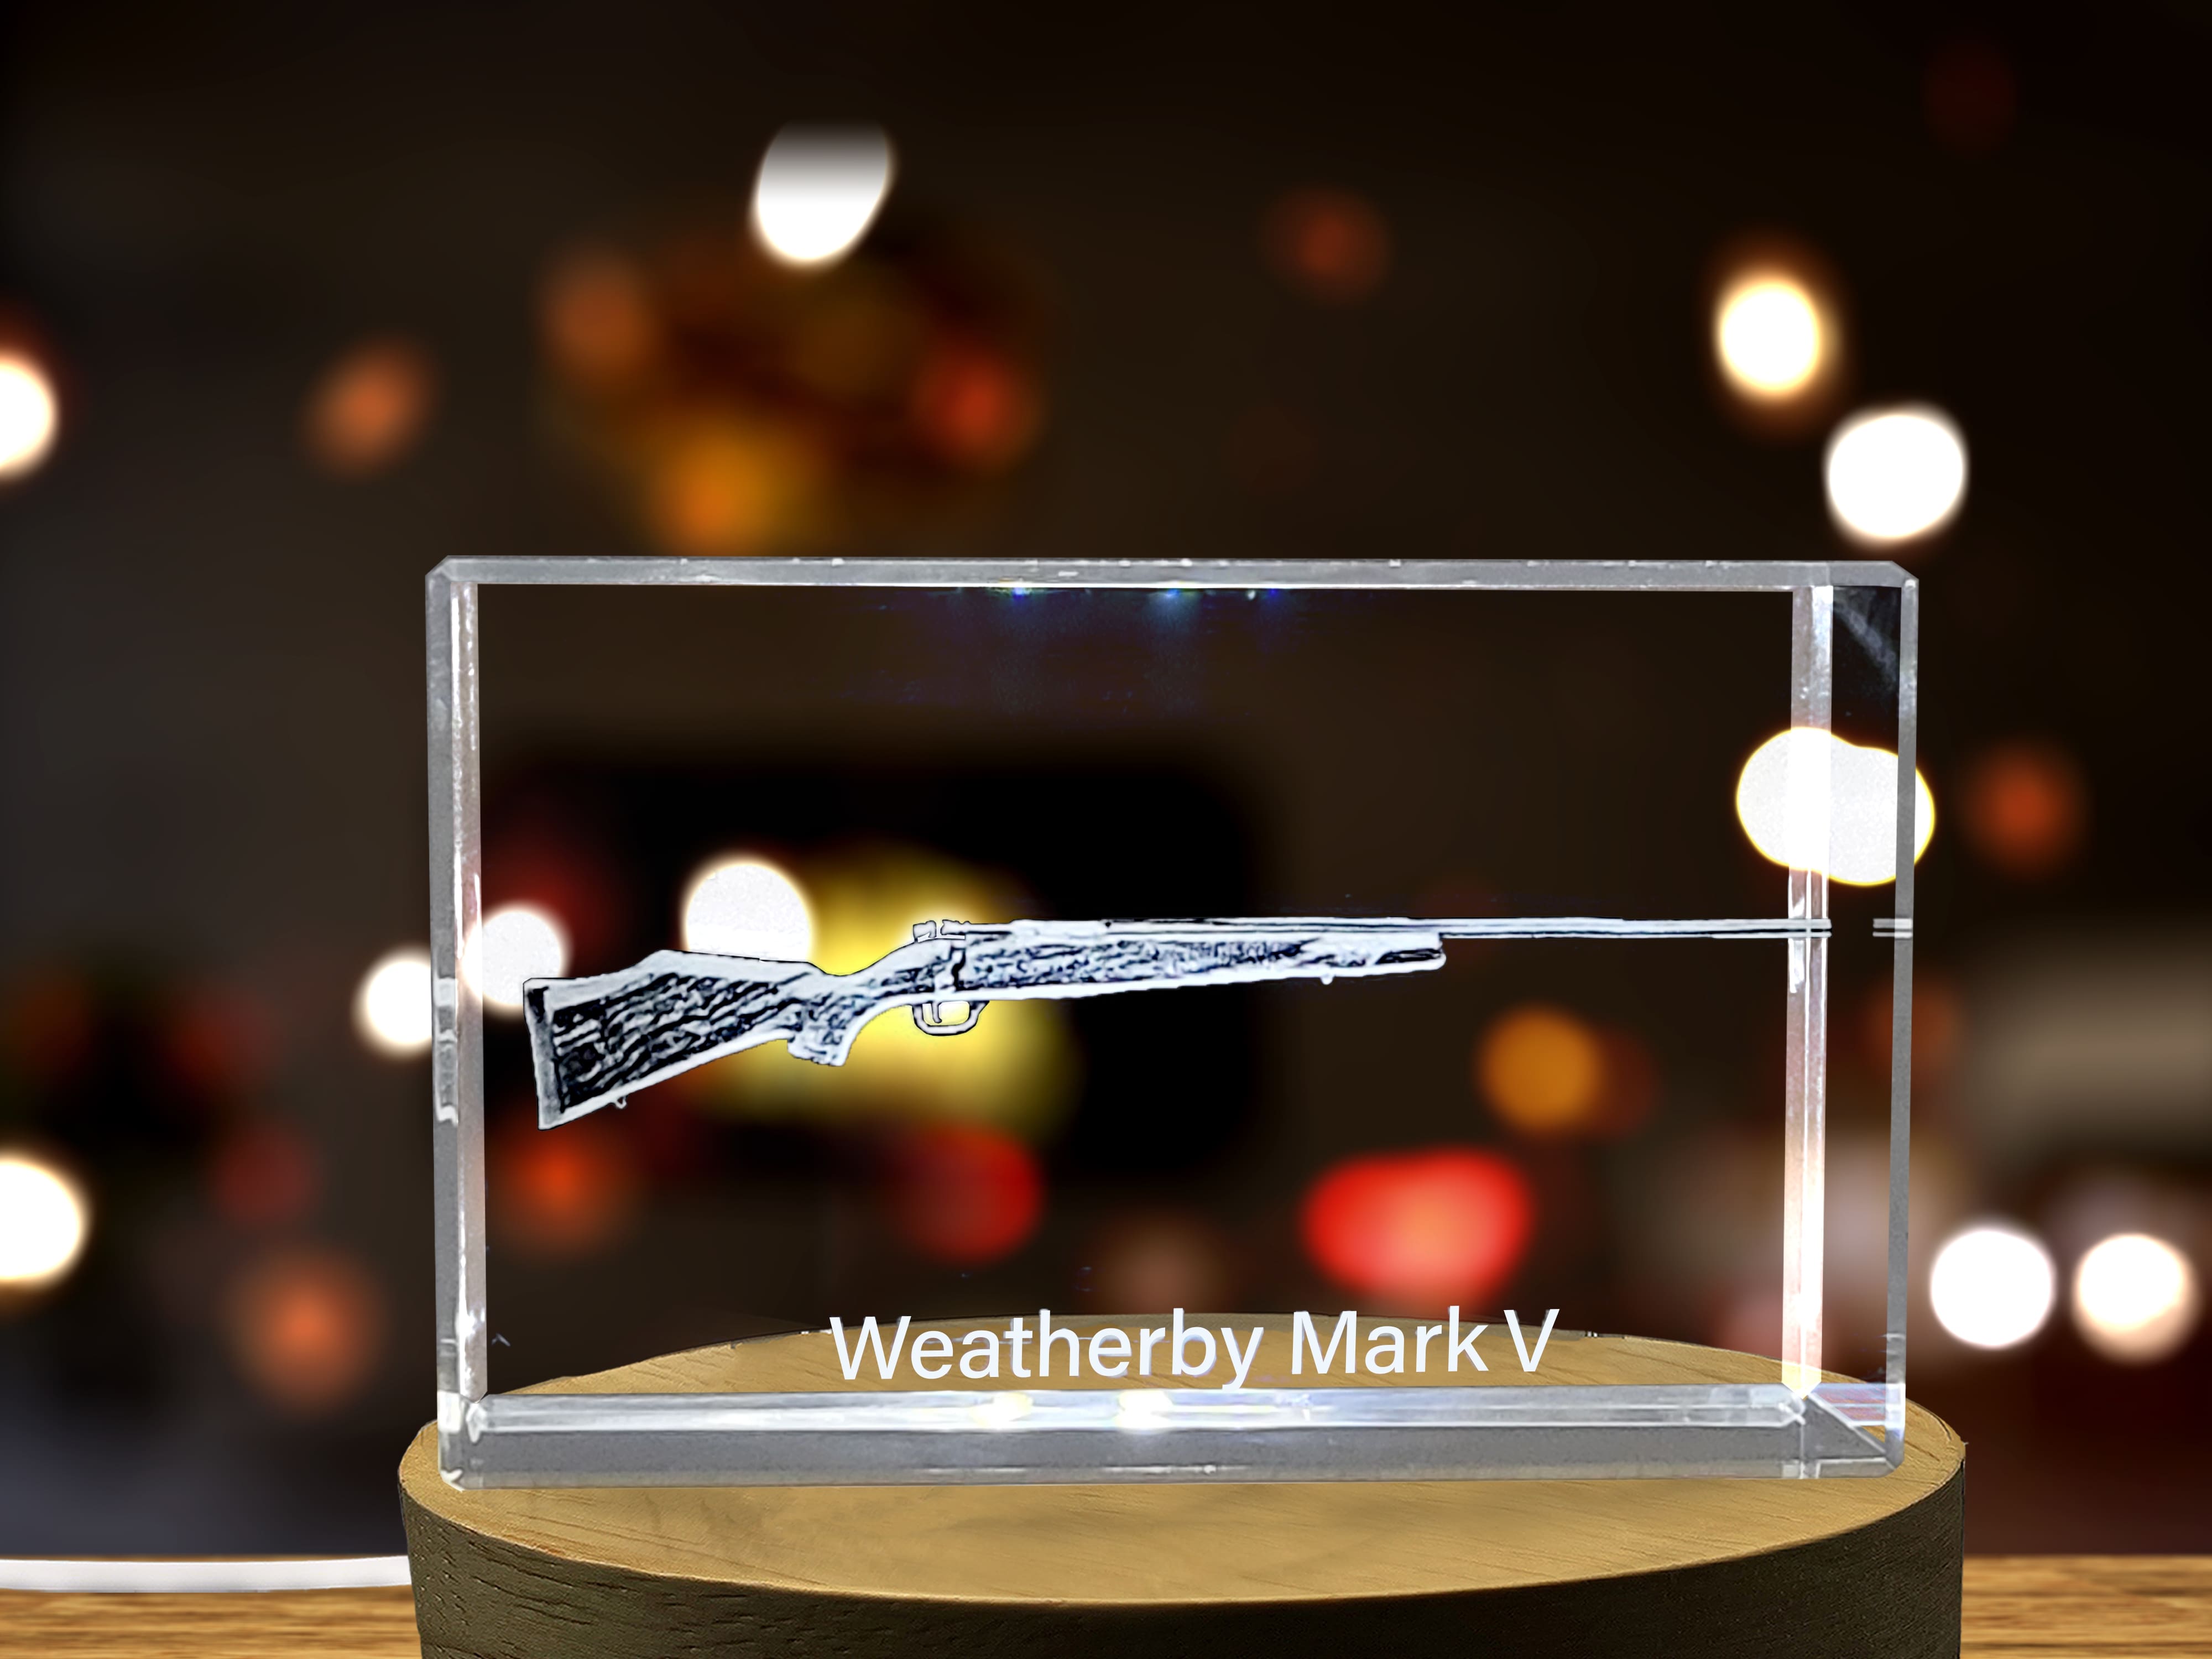 Weatherby Mark V Rifle Design Laser Engraved Display Crystal A&B Crystal Collection